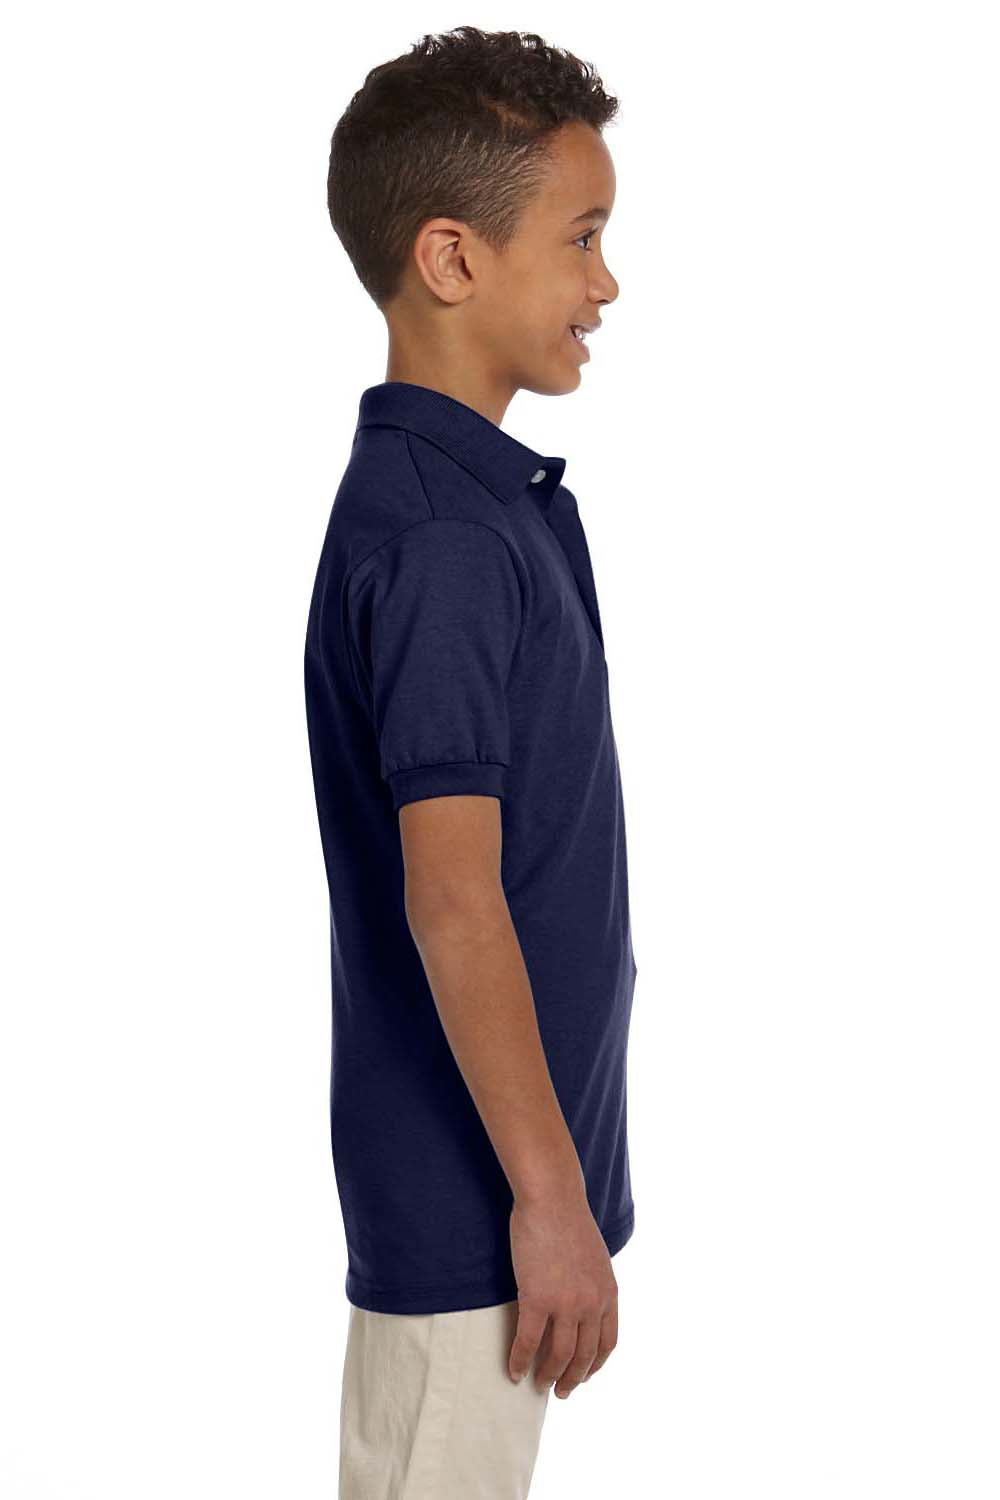 Jerzees 437Y Youth SpotShield Stain Resistant Short Sleeve Polo Shirt Navy Blue Side